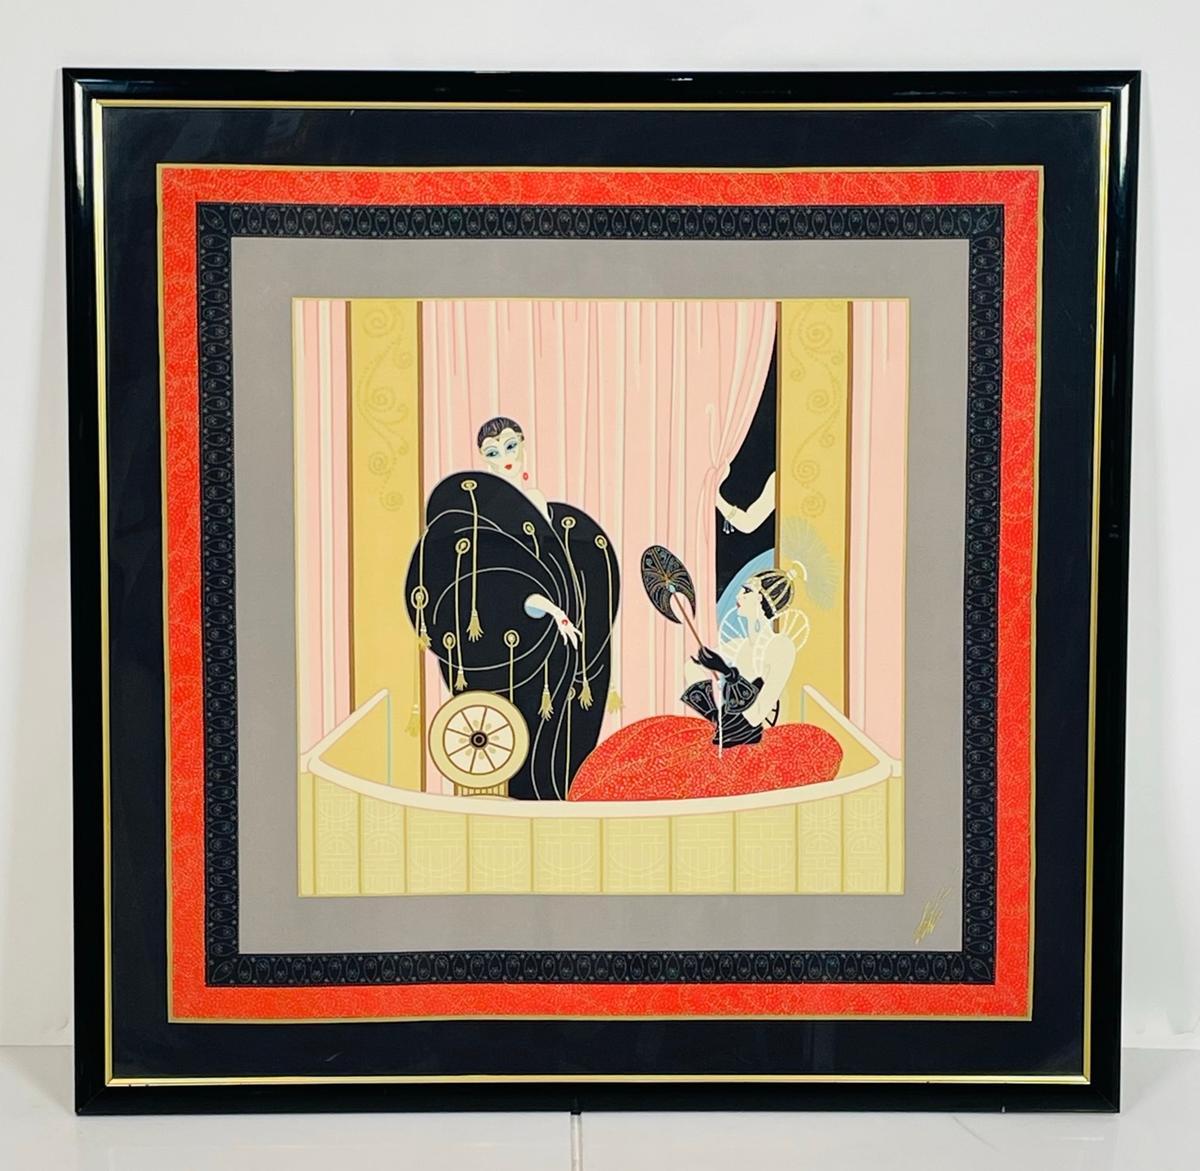 Introducing the exquisite Romain de Tirtoff Erté 1987 Loge De Theatre Framed Silk Scarf Wall Art, Signed. This stunning piece combines the elegance of a silk scarf with the allure of a captivating painting, serving as a unique and eye-catching